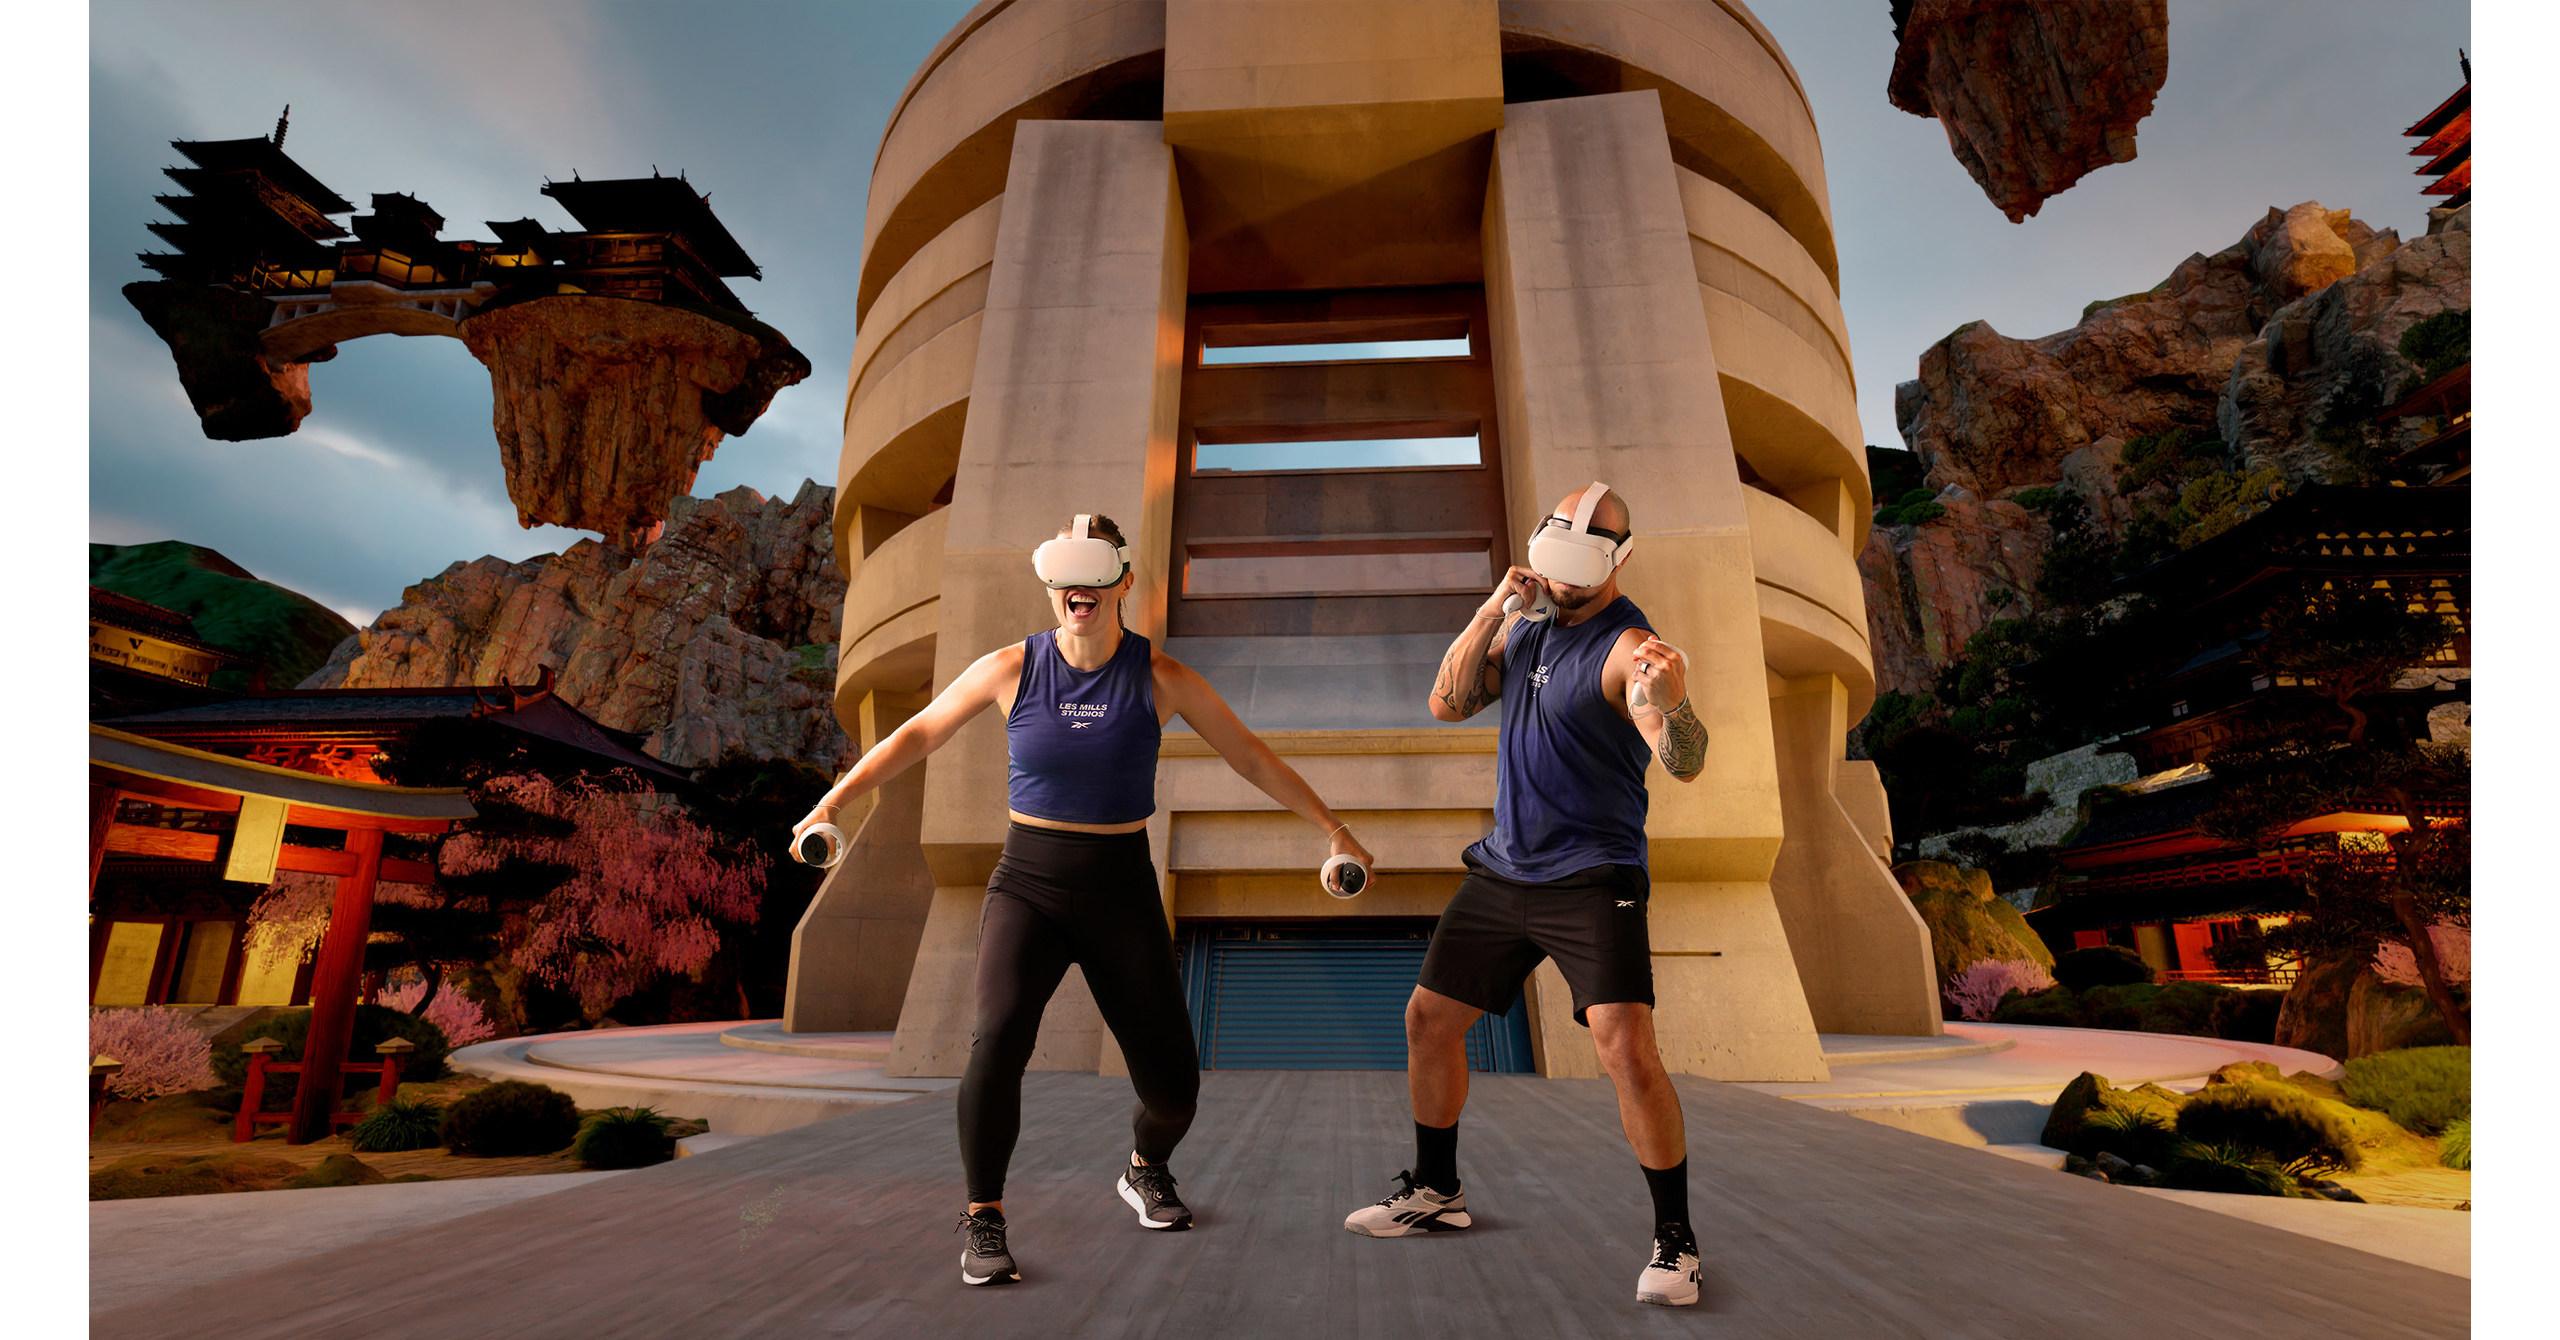 LES MILLS XR BODYCOMBAT Breaks New Ground with Multi-Reality